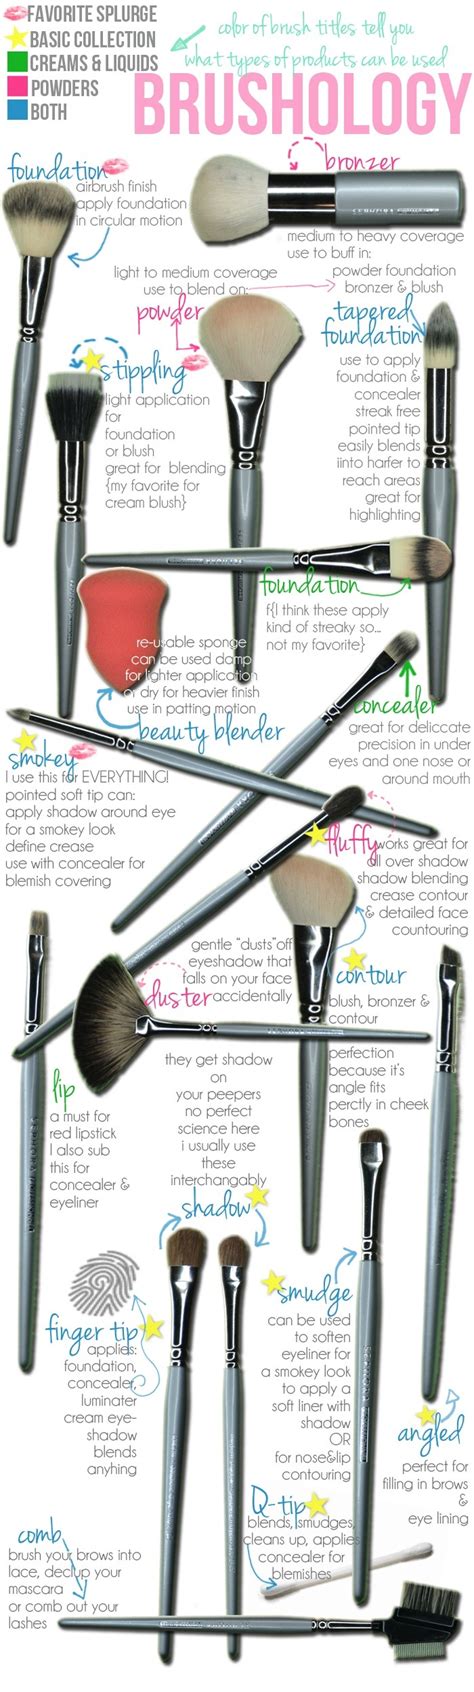 a how to use guide on different types of makeup brushes